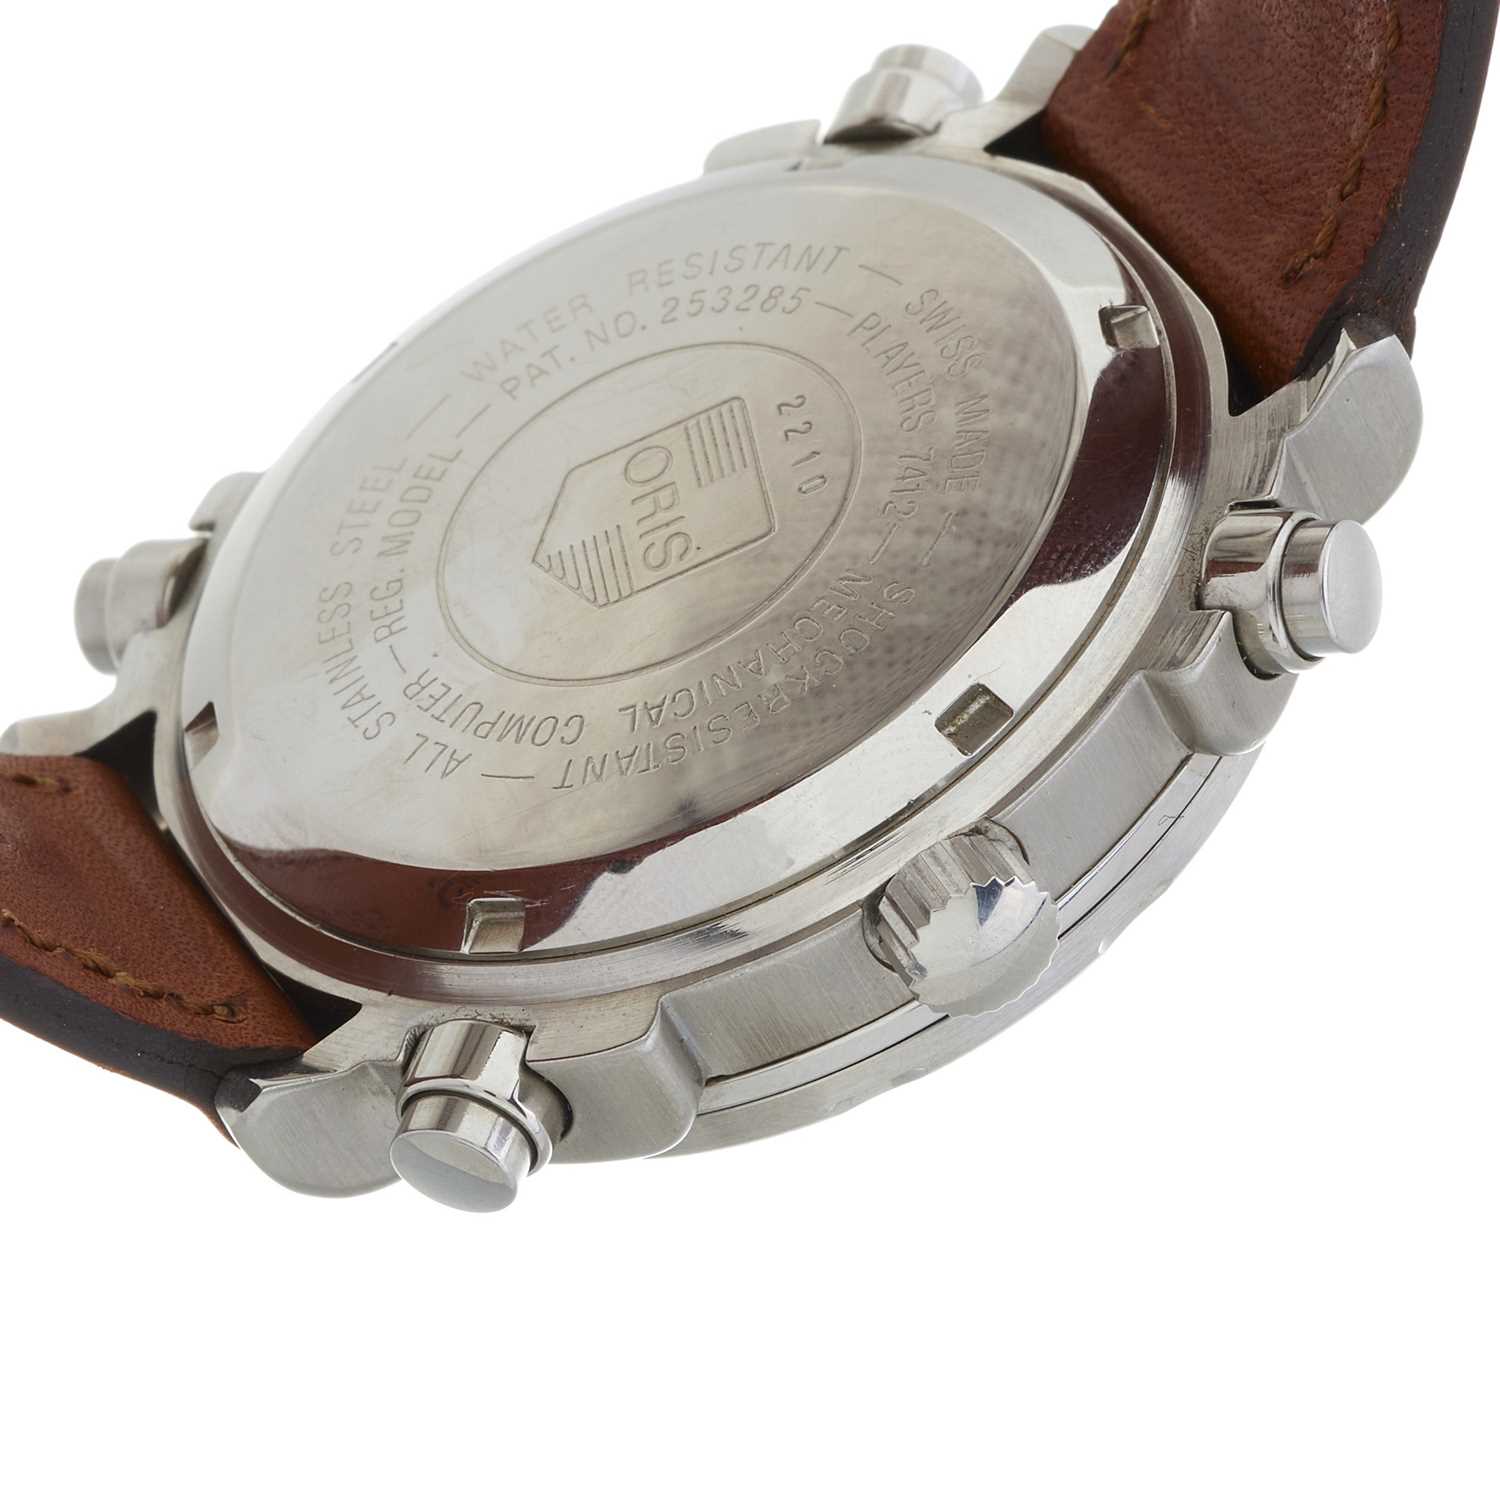 Oris, a stainless steel Players wrist watch - Image 3 of 3